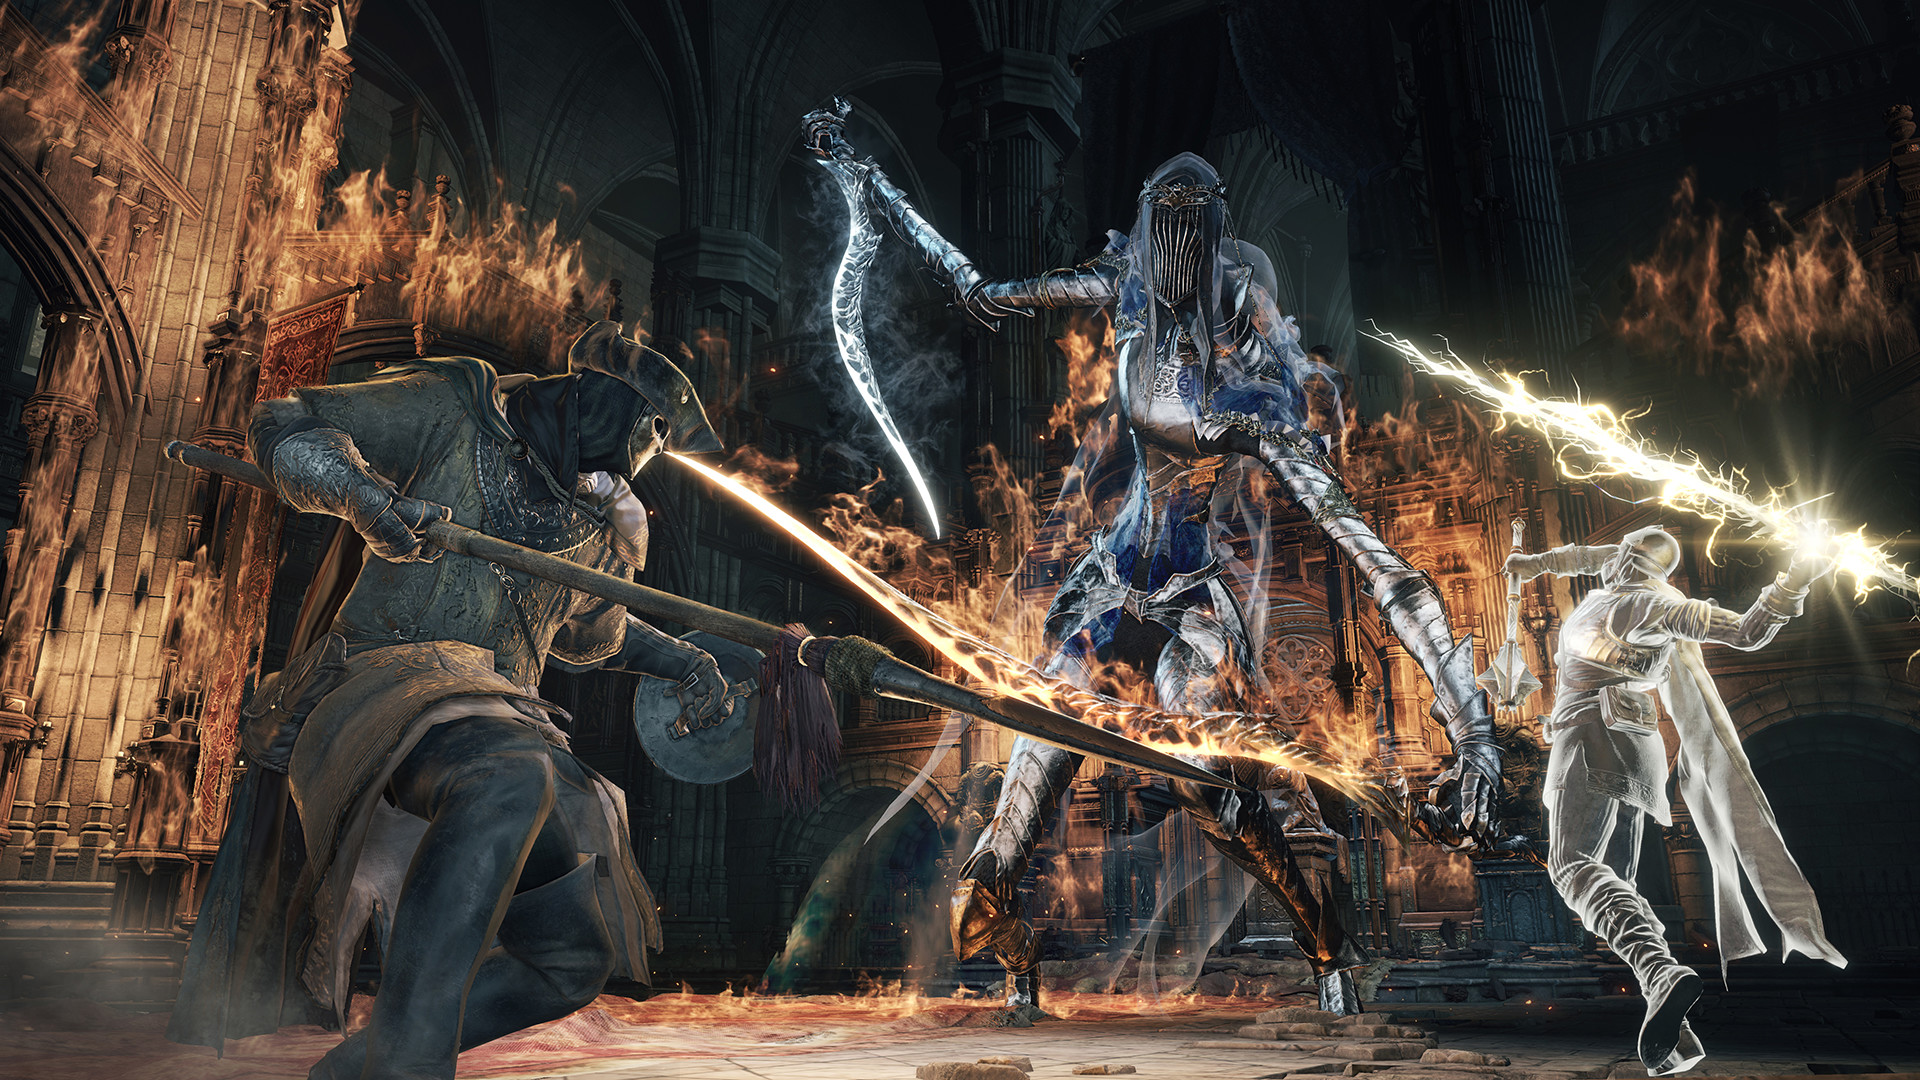 The Dark Souls RPG will have almost every piece of gear from Dark Souls 3